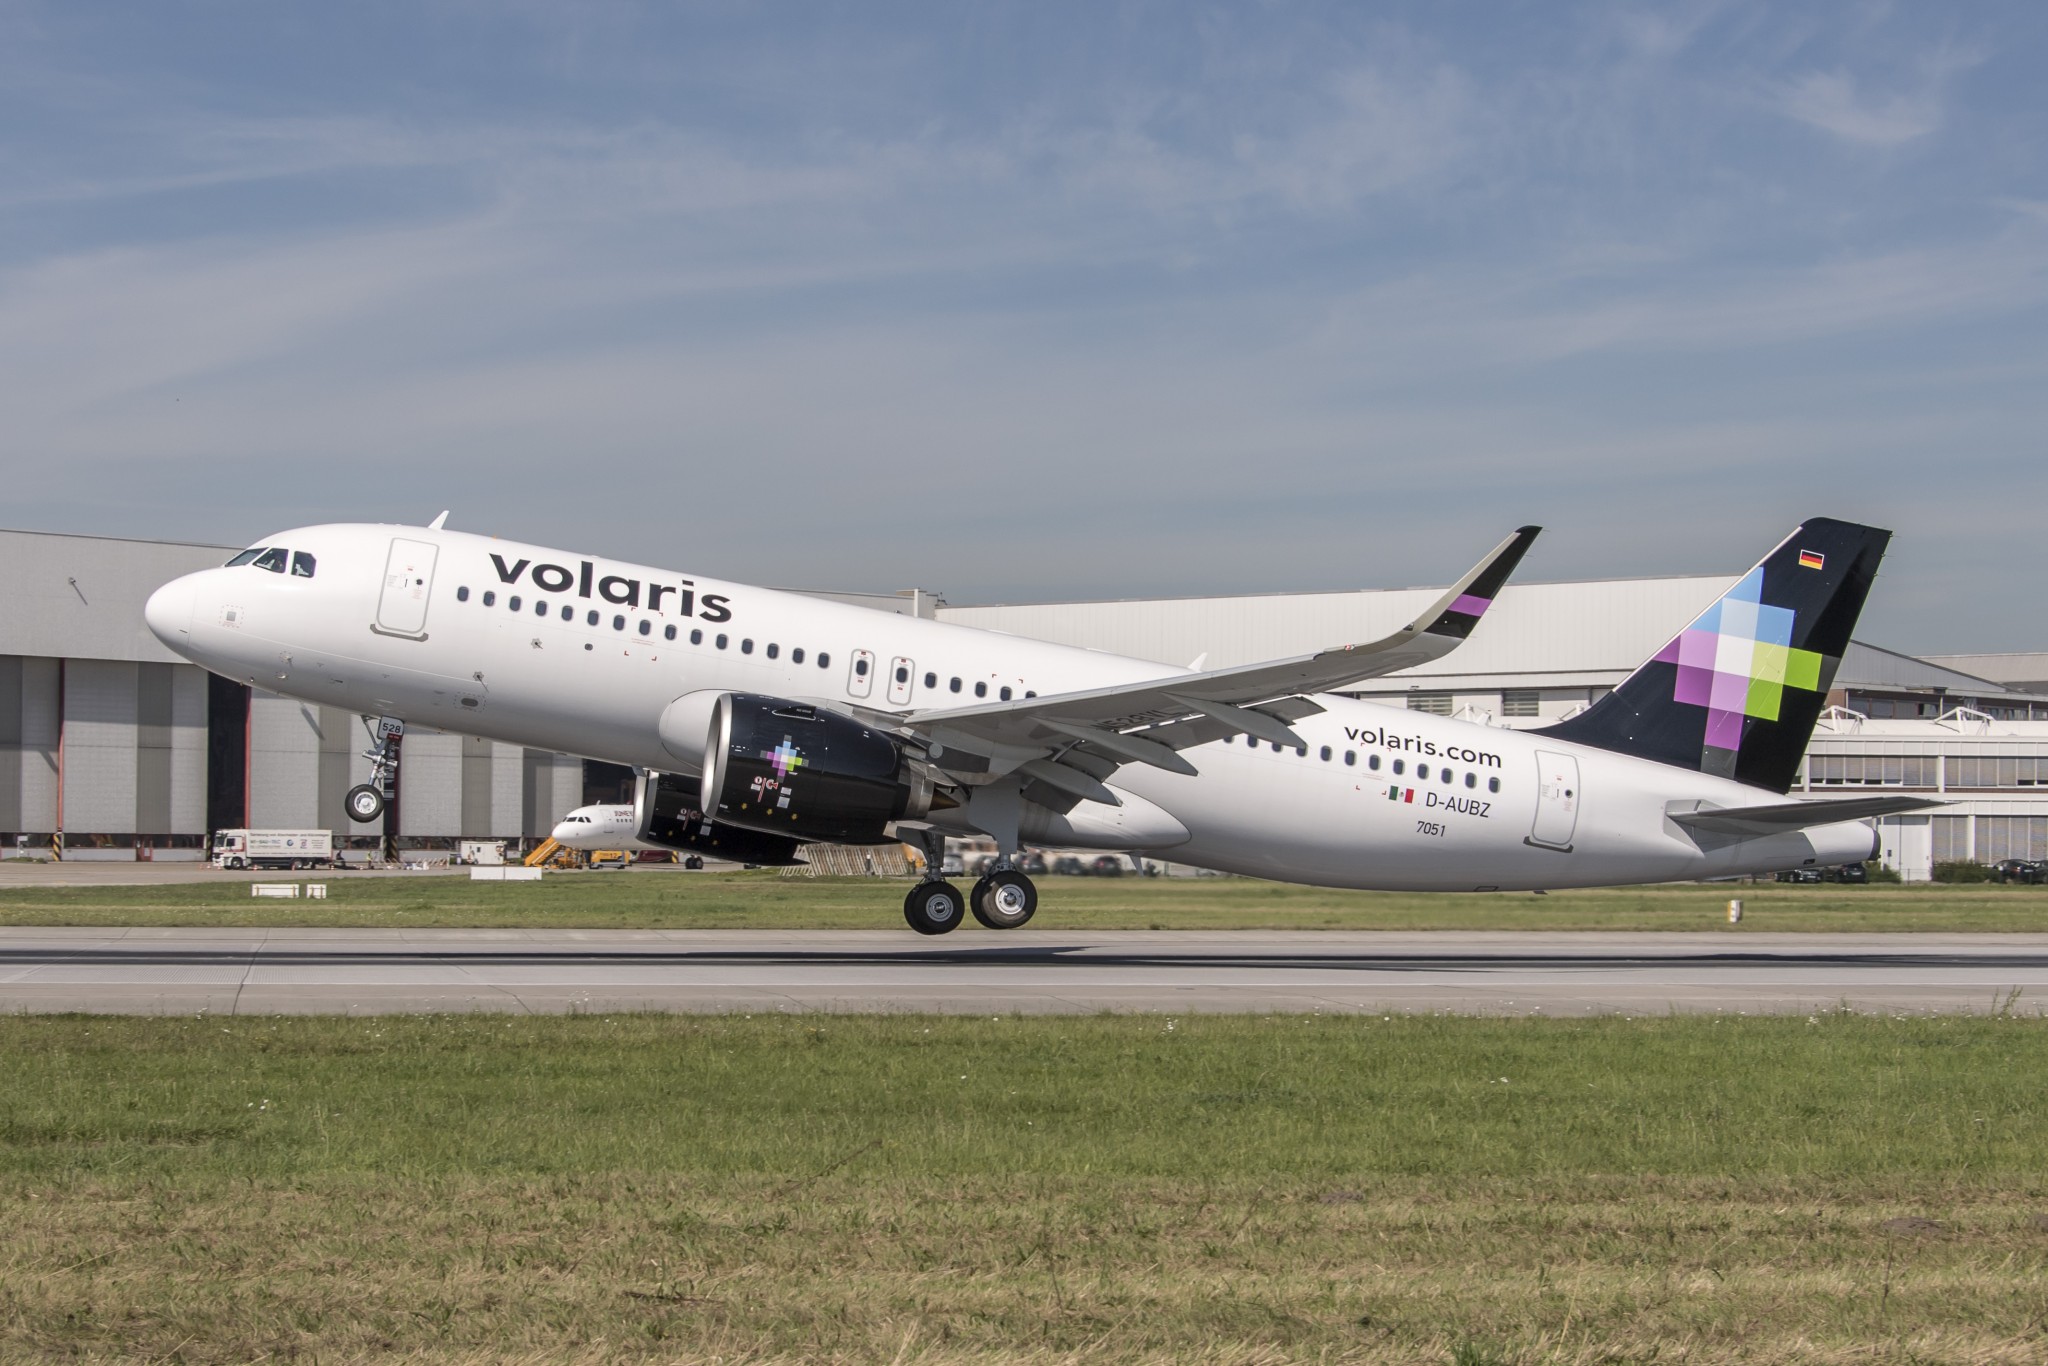 AerCap delivers its first A320neo aircraft, on lease to Volaris